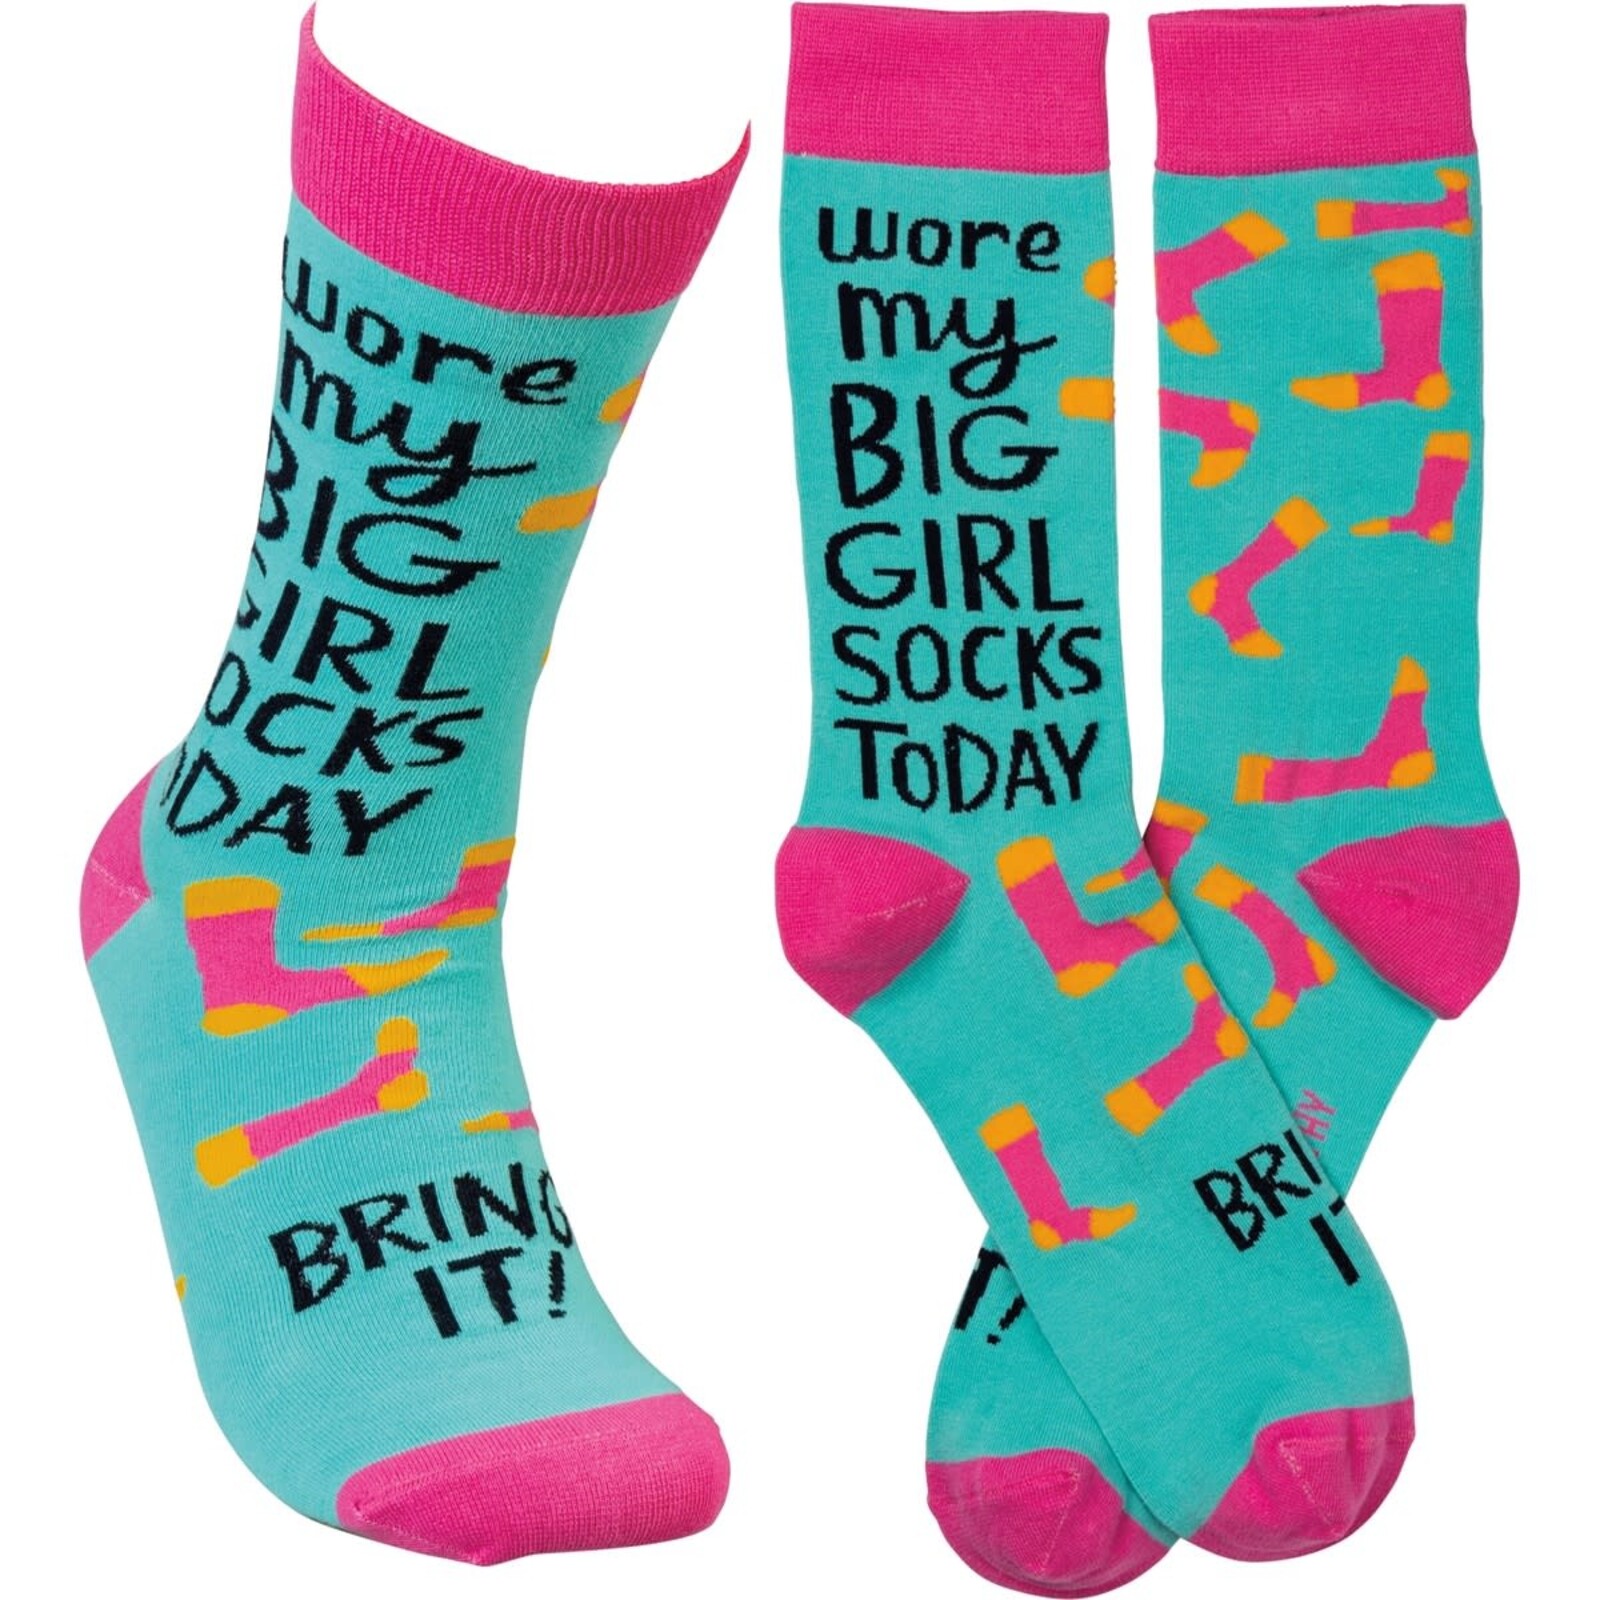 Primitives by Kathy Wore My Big Girl Socks Today Bring It Socks   101524 loading=